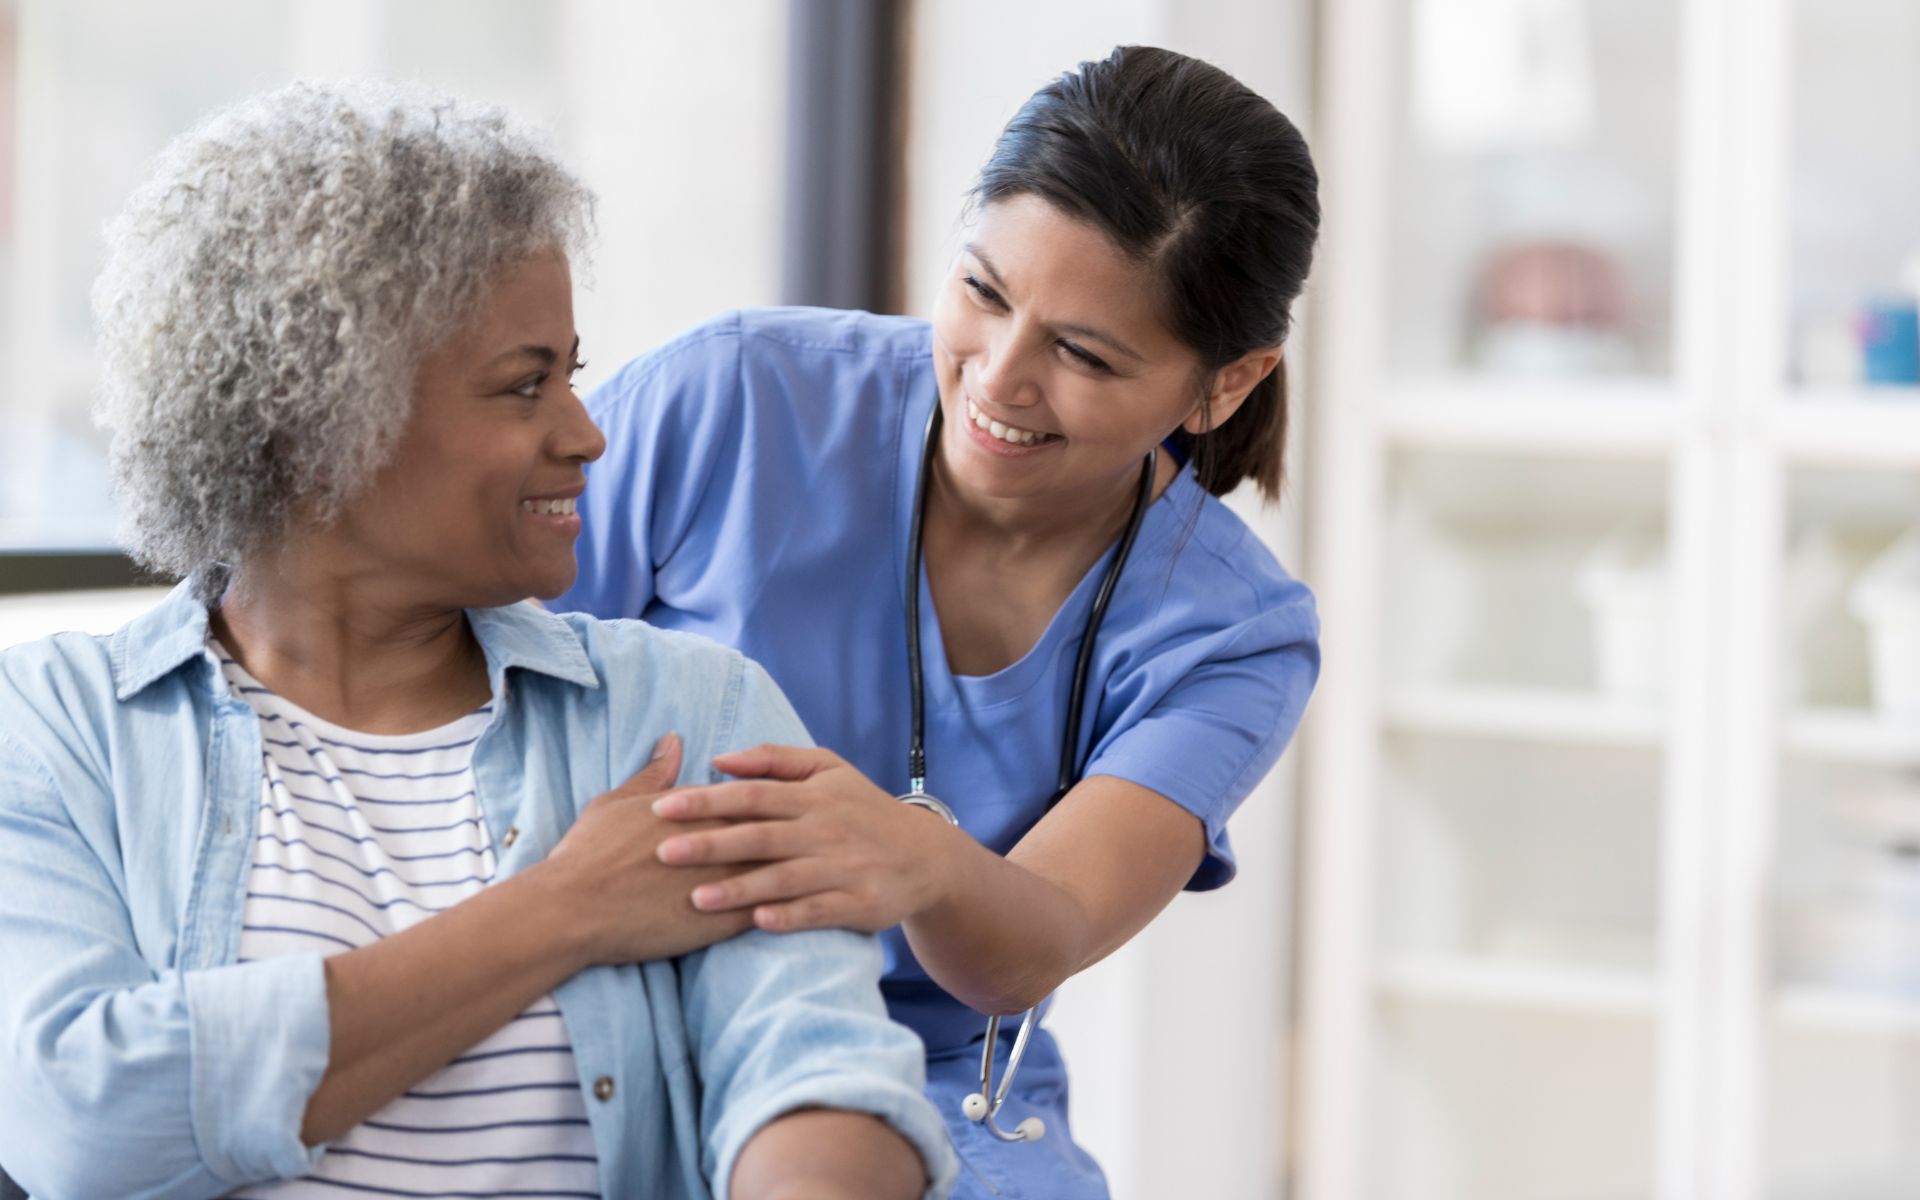 Home Care vs Long-Term Care Facility: What’s the Difference?